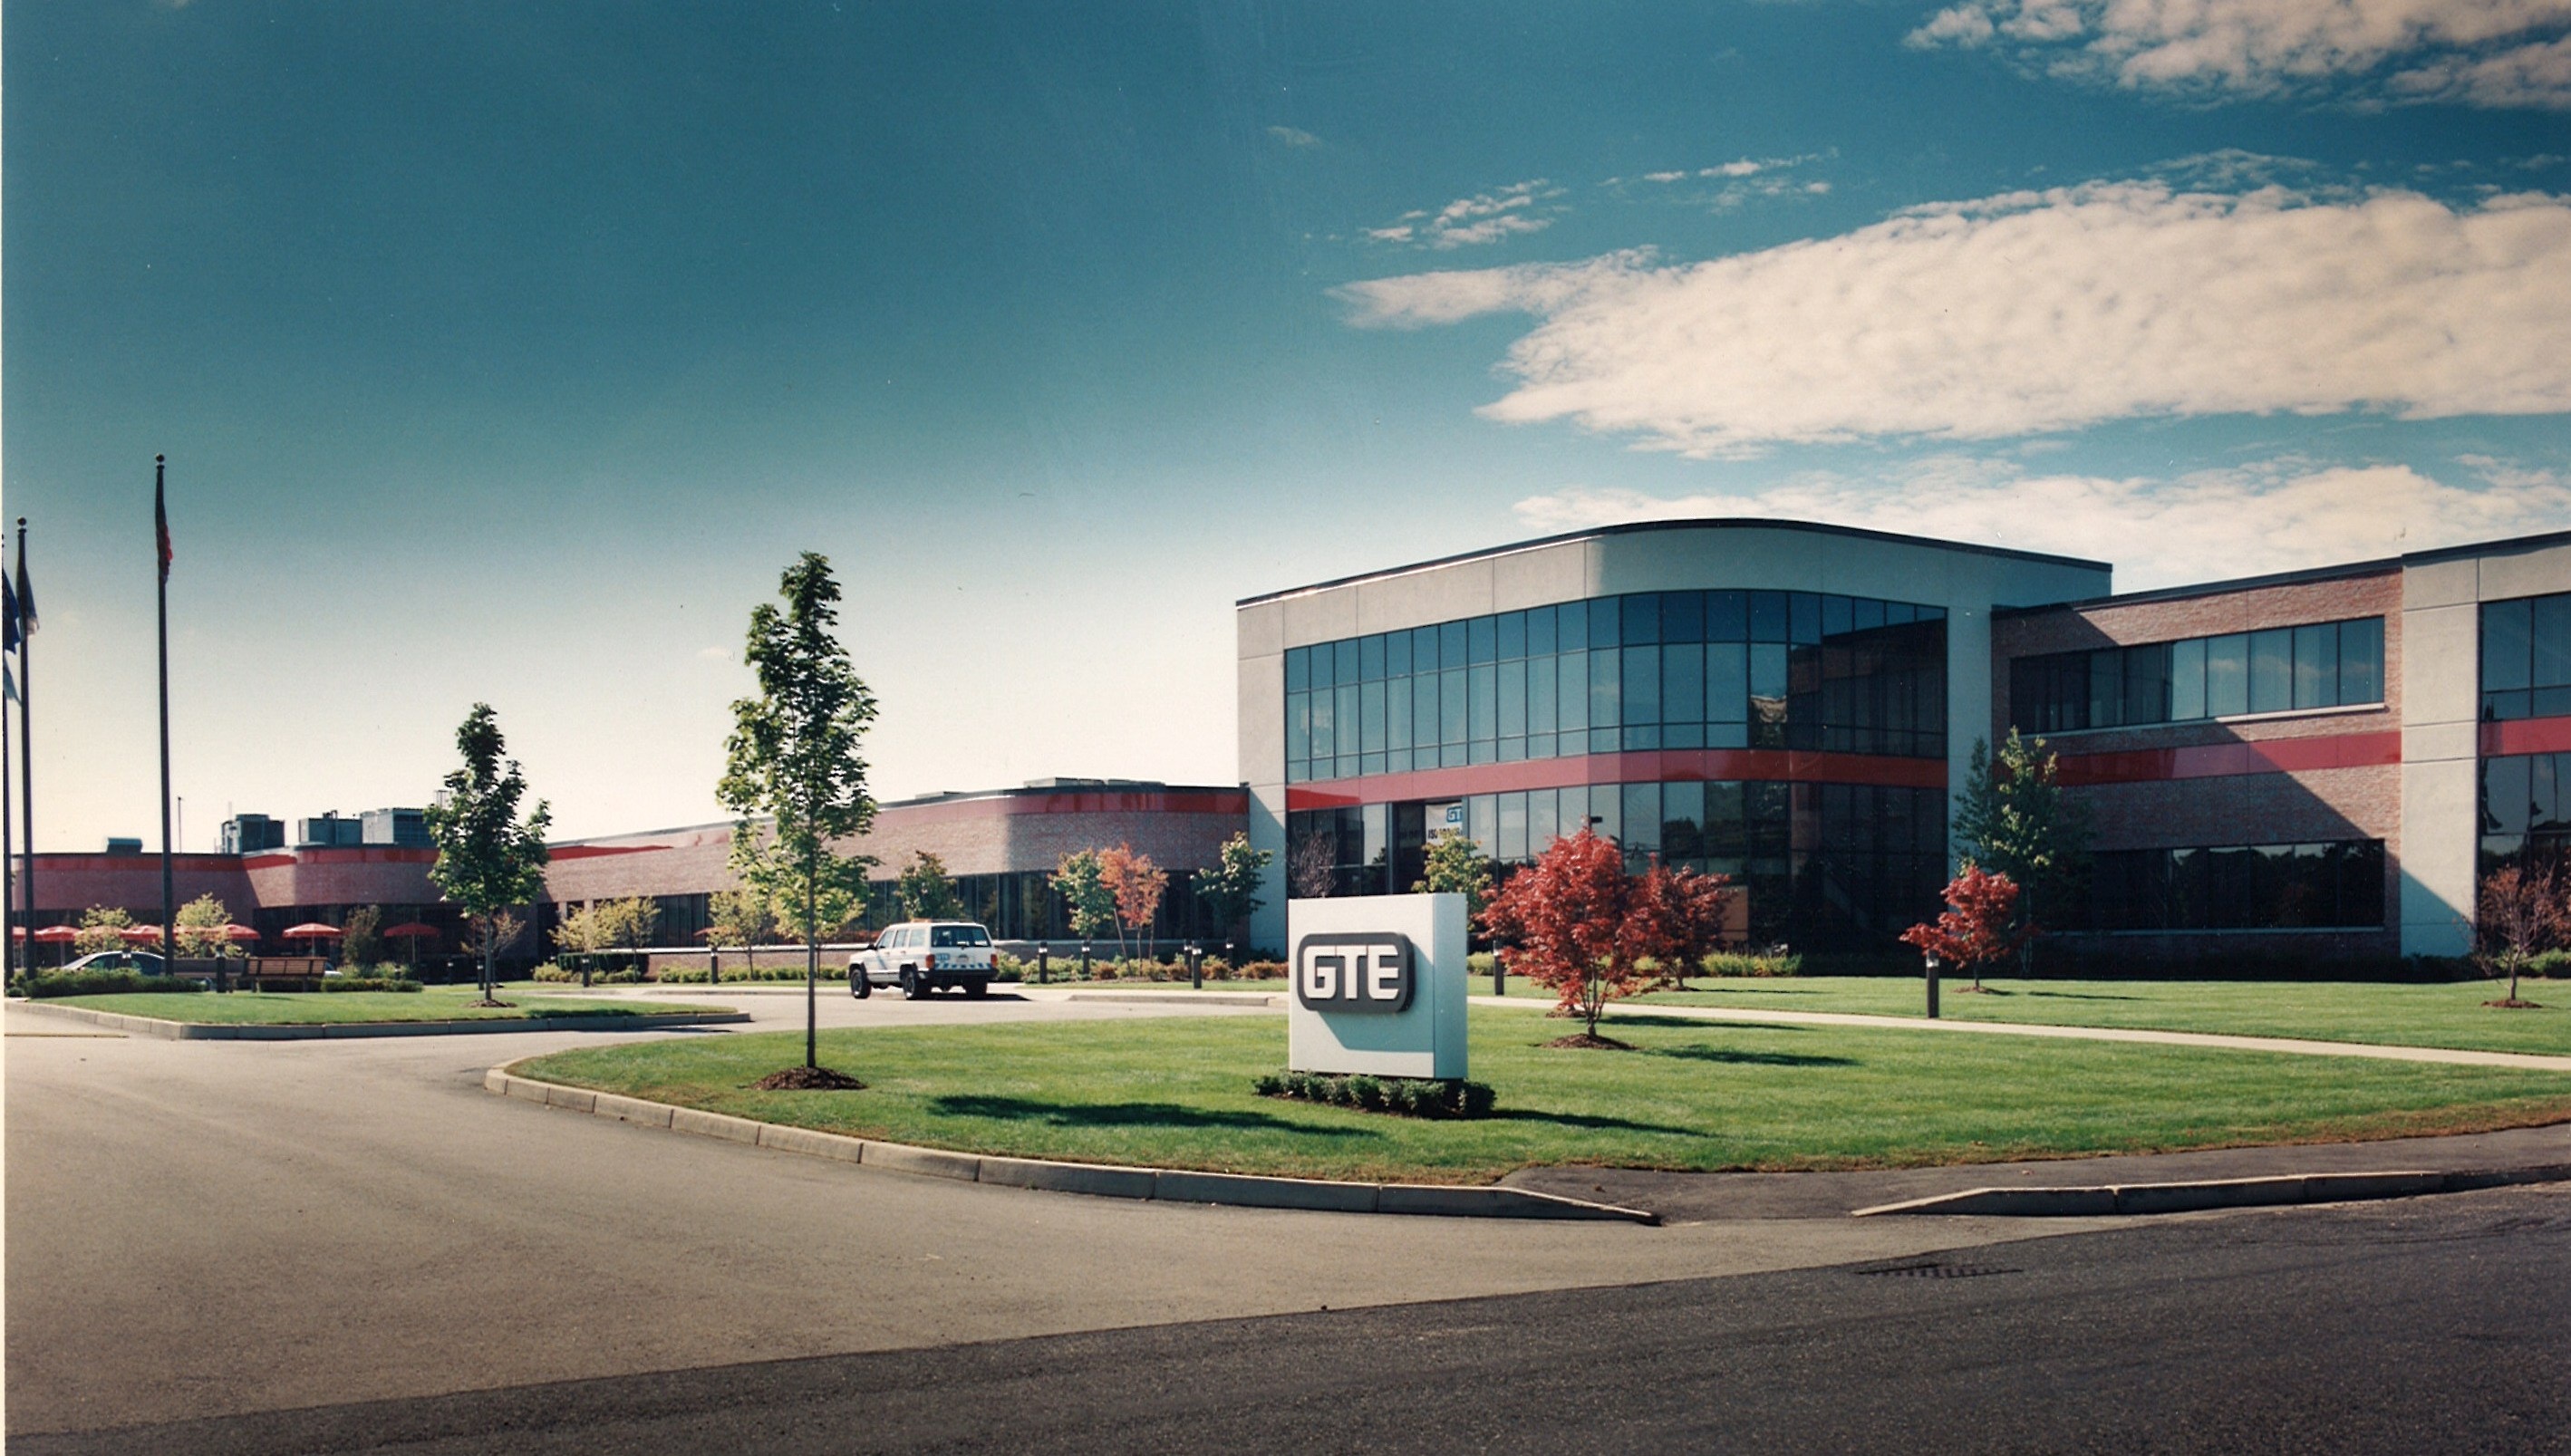 GTE-General Dynamics <strong>Needham MA</strong>